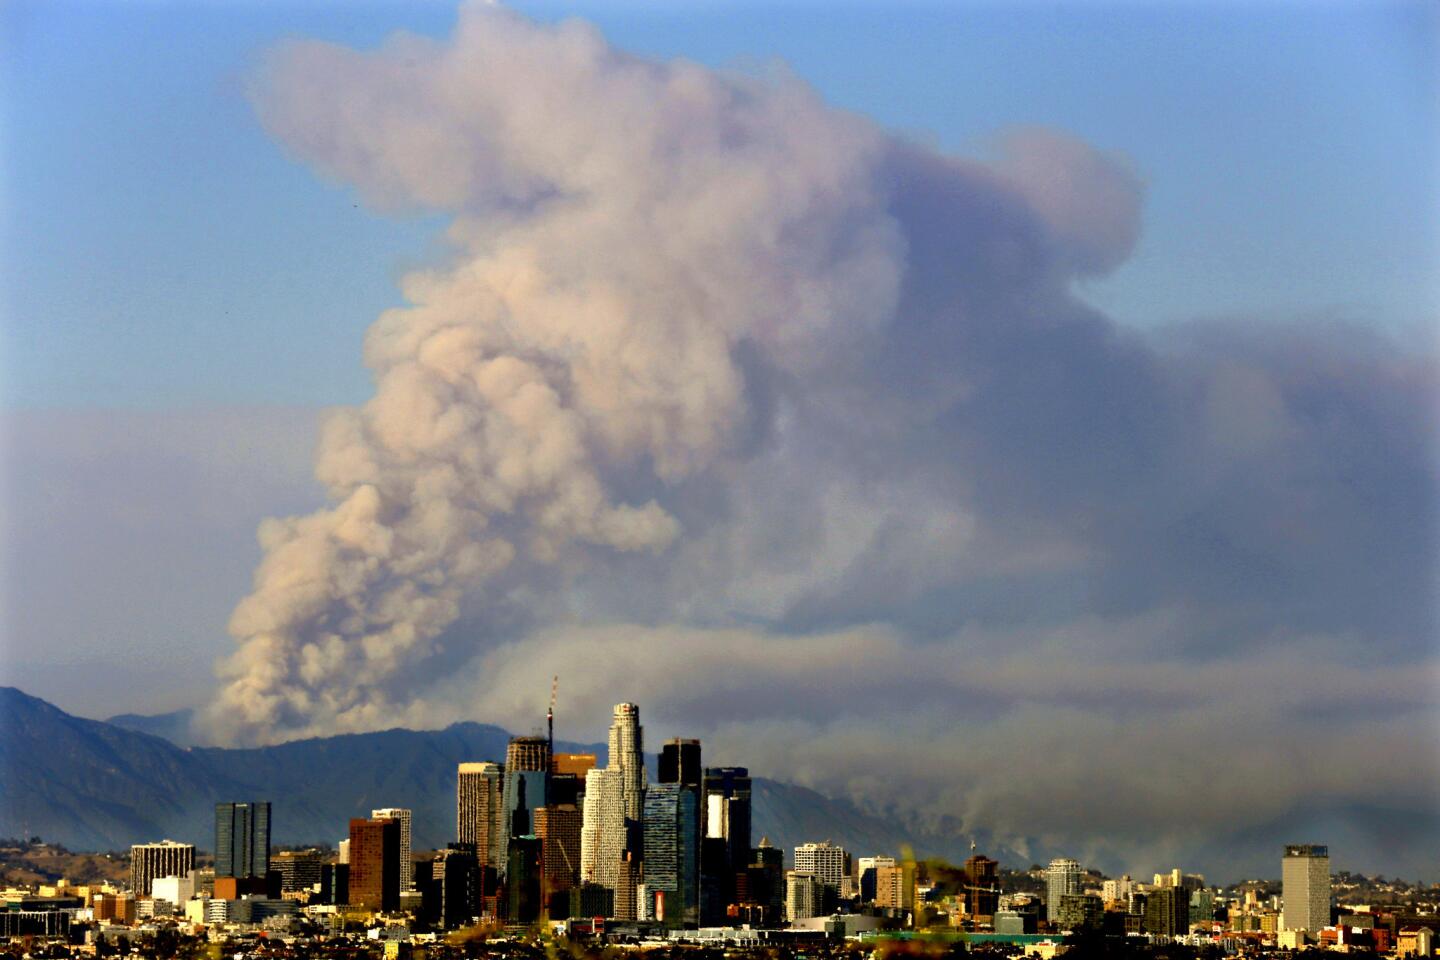 Plumes of smoke frame the Los Angeles skyline from brush fires burning above Duarte and Azusa.